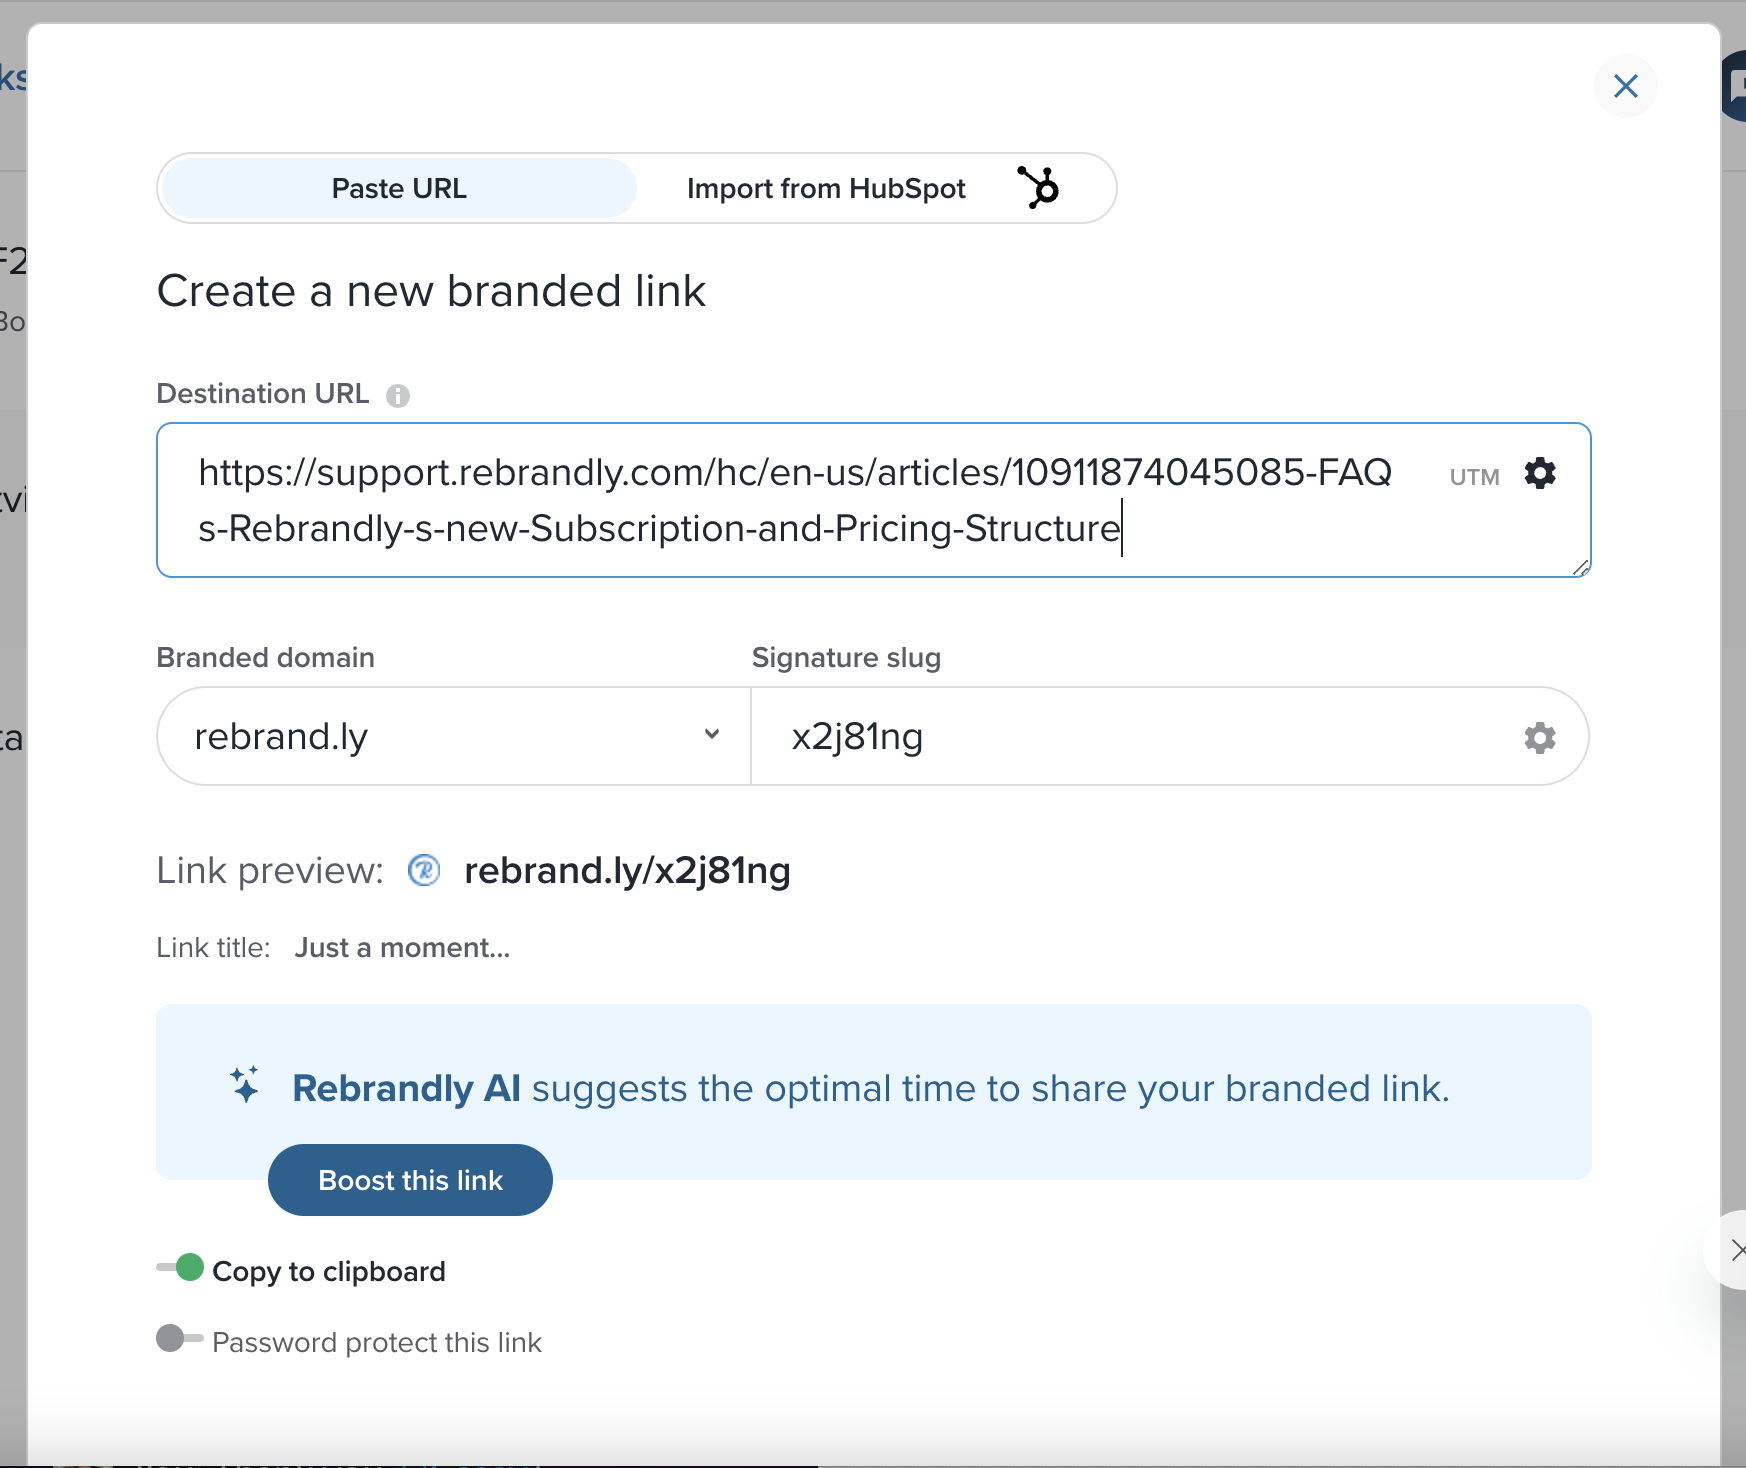 Create a new branded link